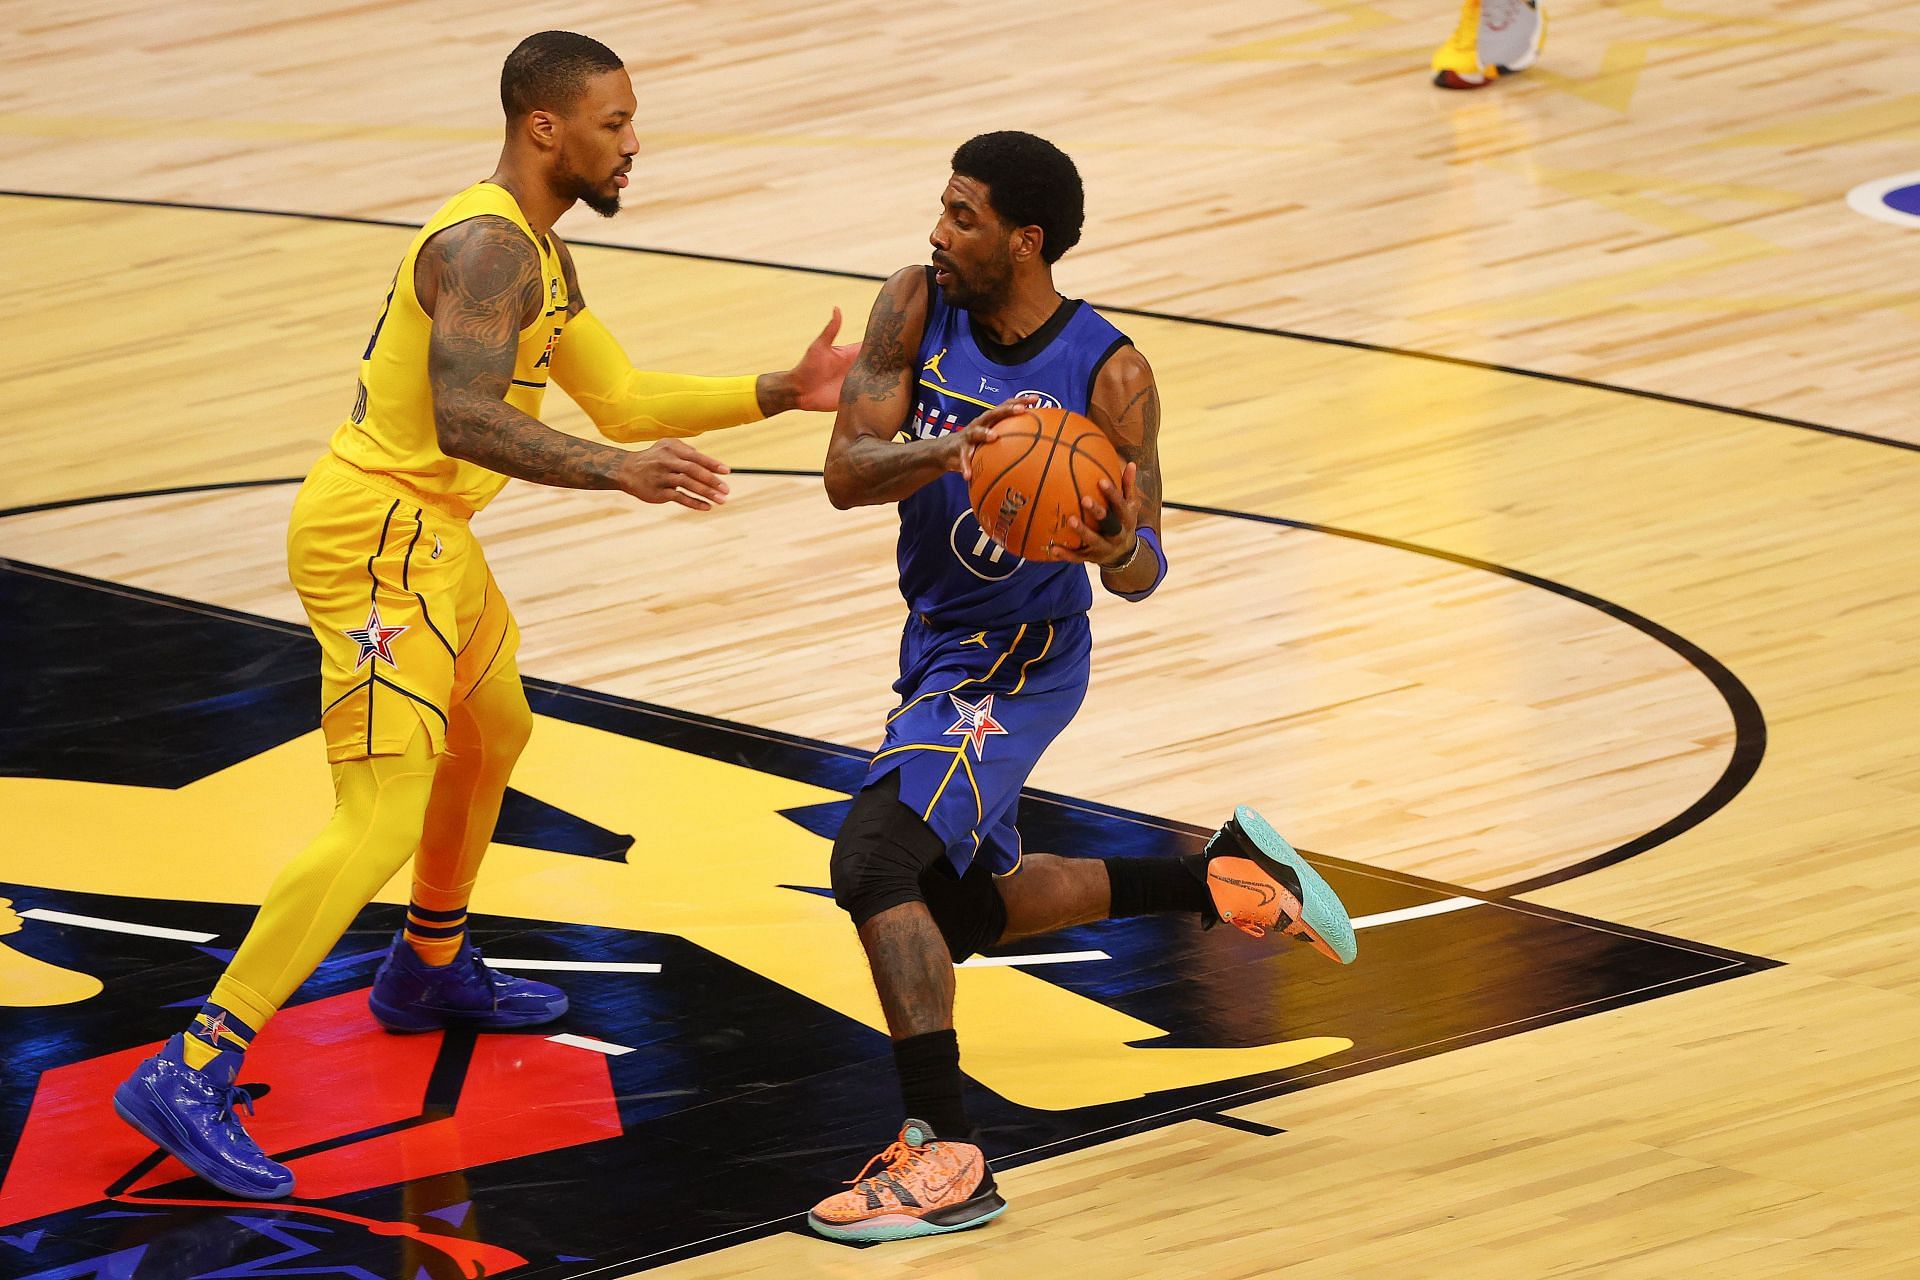 Kyrie Irving against Damian Lillard at the 2021 NBA All-Star Game